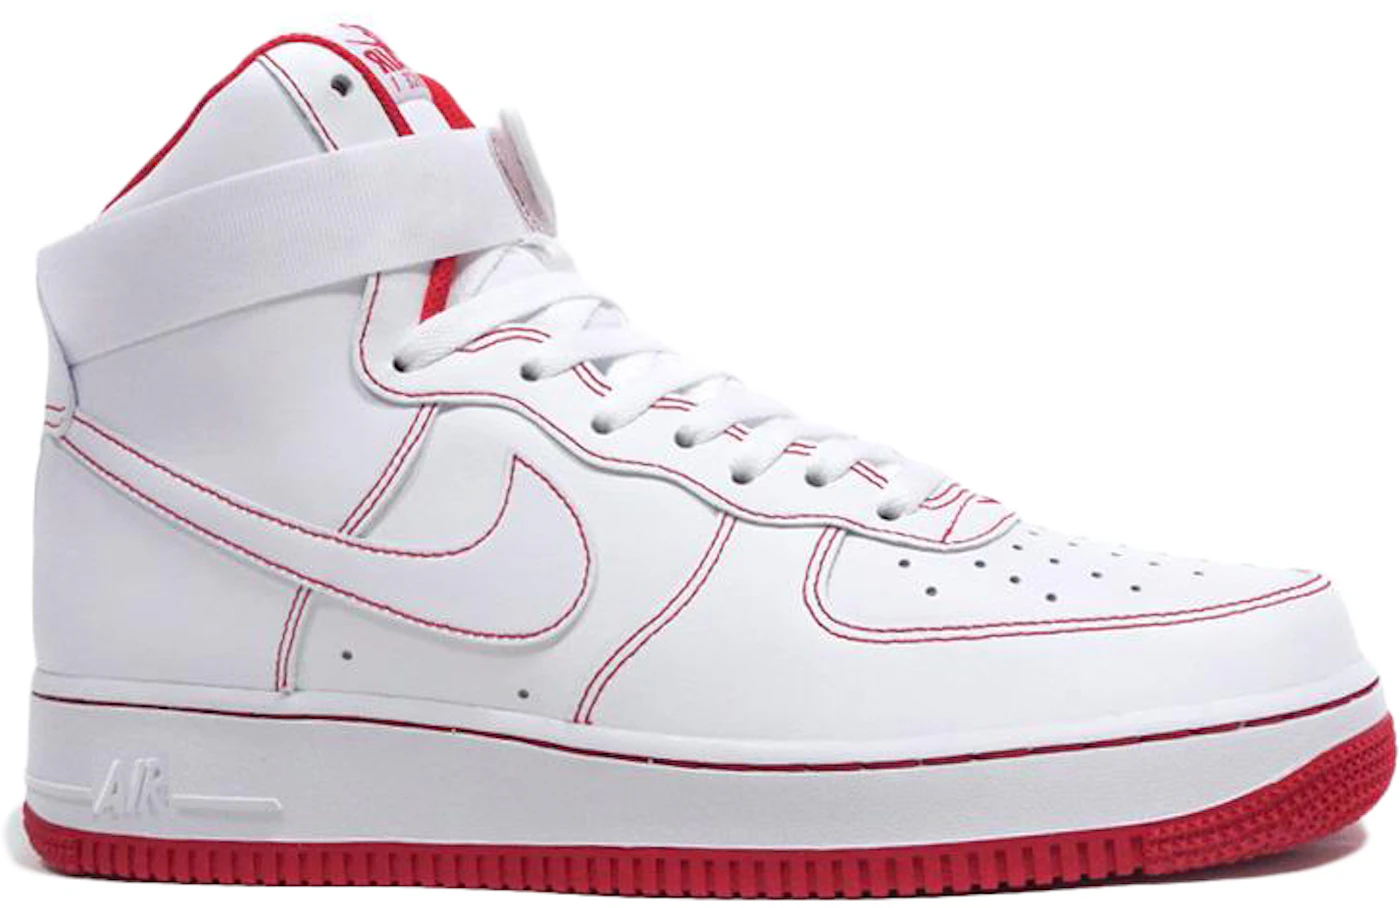 Nike Air Force 1 High '07 White University Red